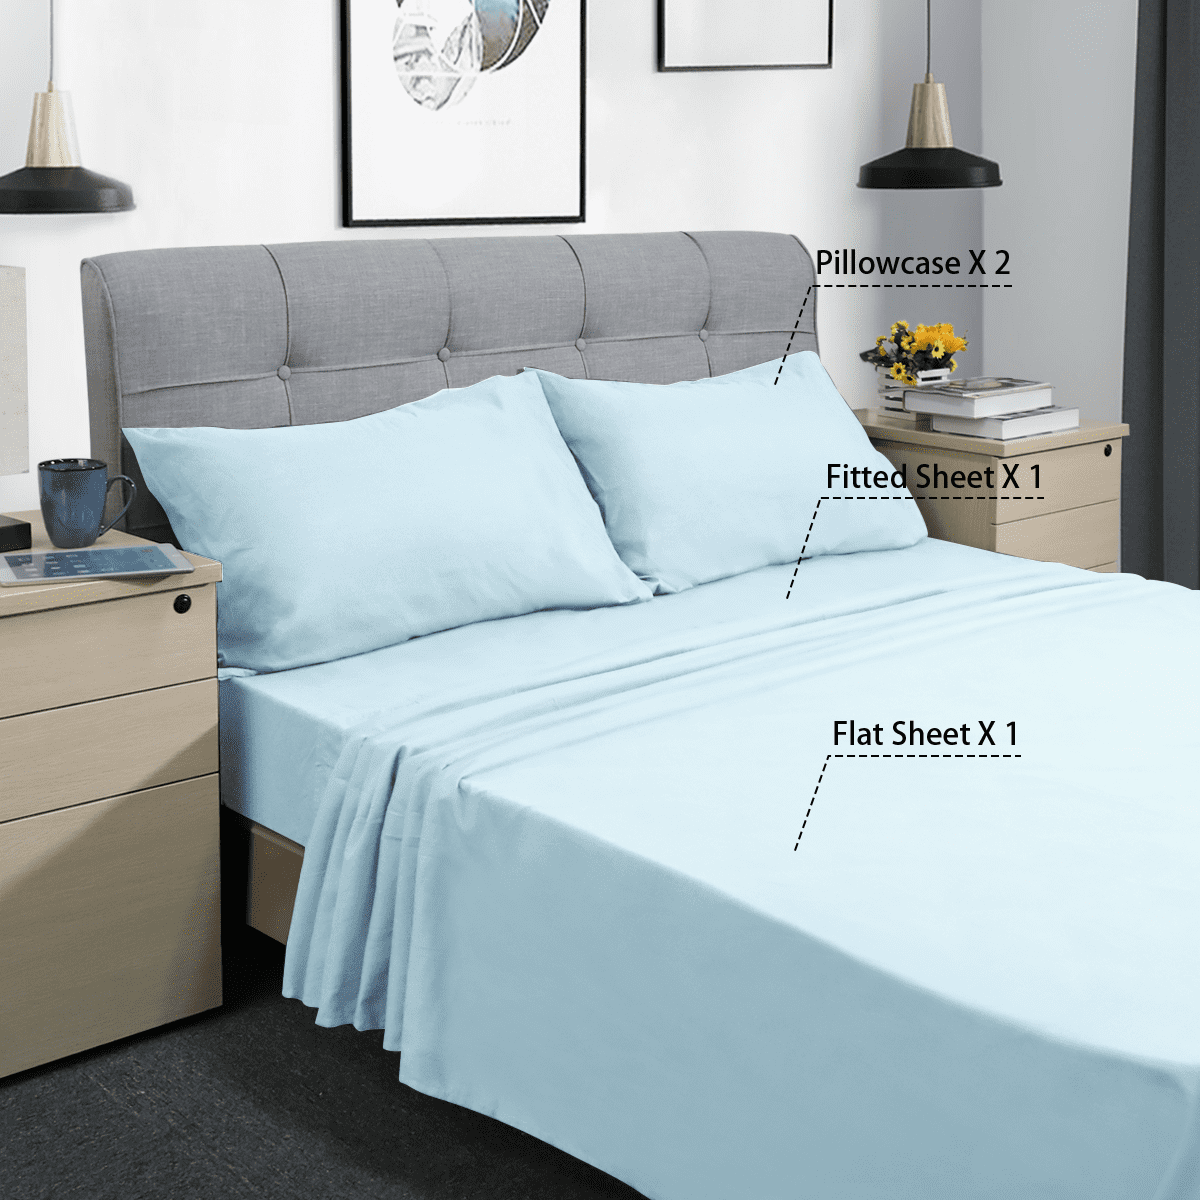 Full,Cream HOMEIDEAS 6 Piece Bed Sheets Set Extra Soft Brushed Microfiber 1800 Bedding Sheets Deep Pocket Wrinkle & Fade Free